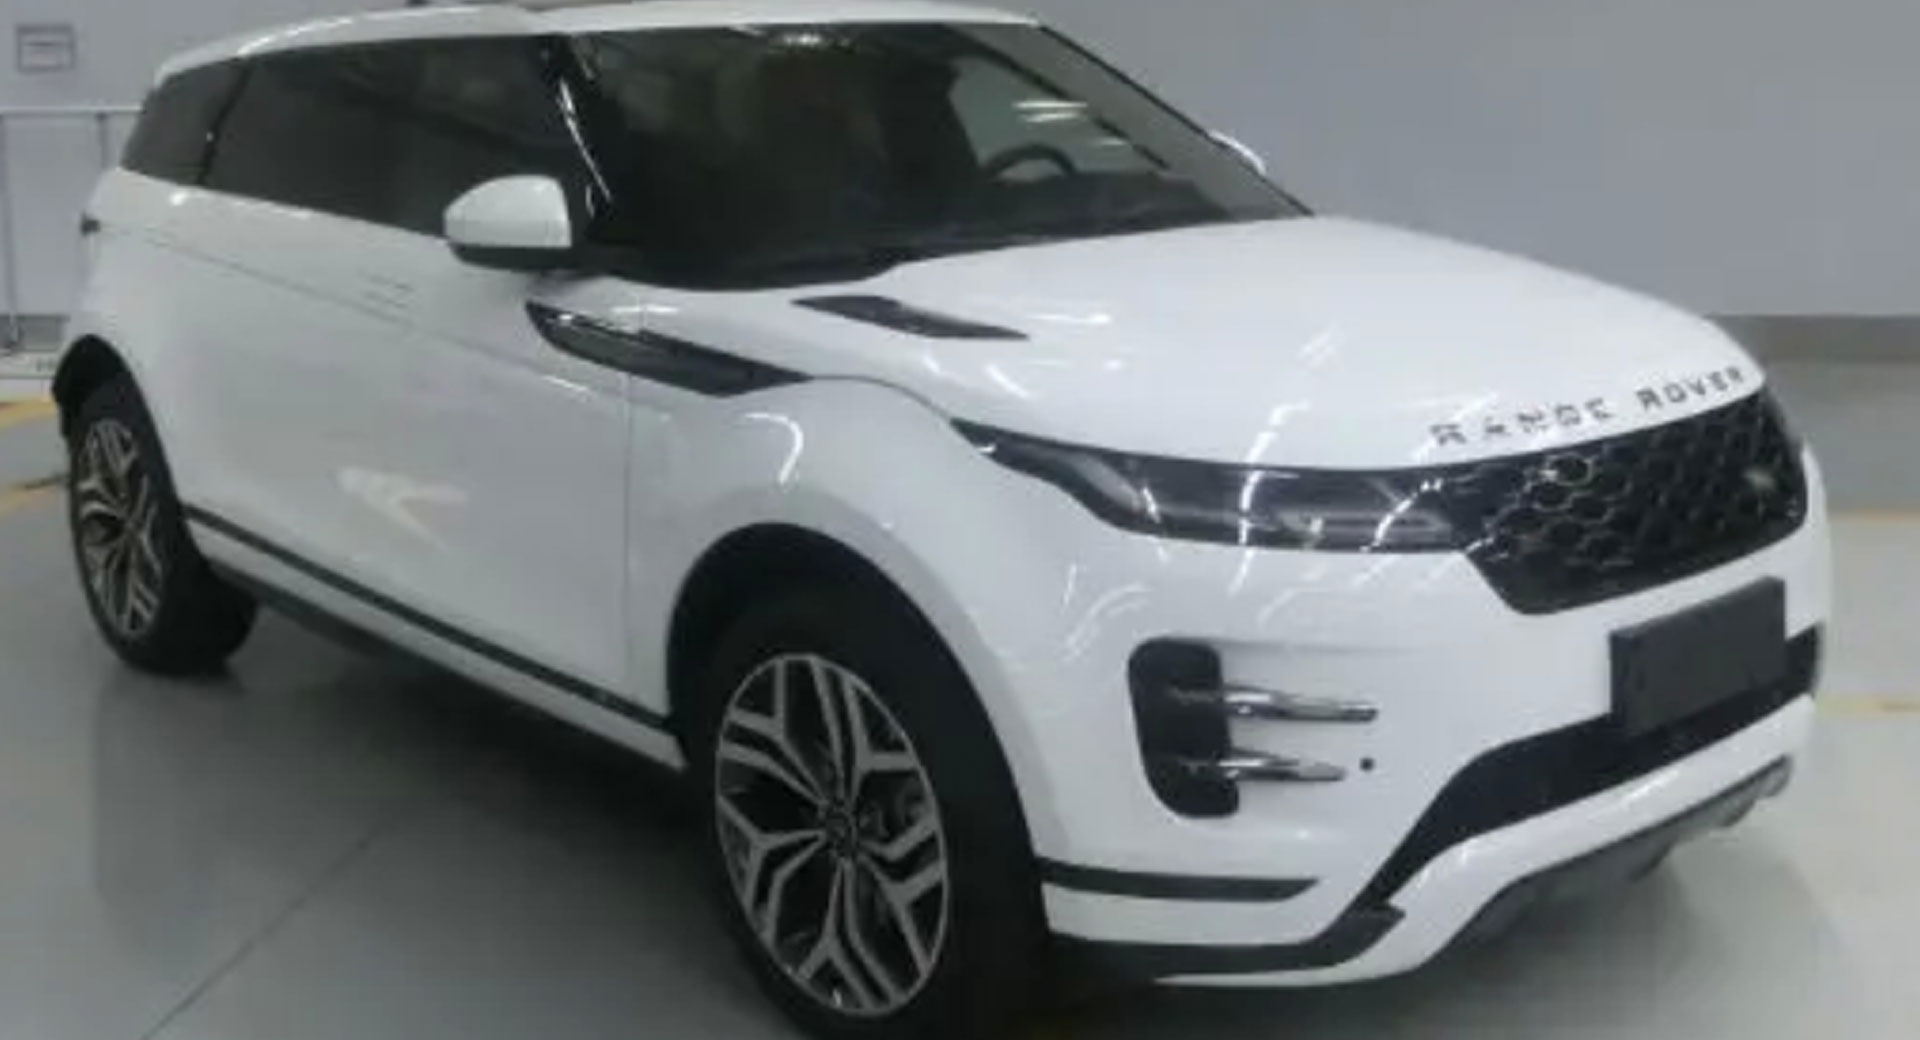 Range Rover Evoque LWB Stretches Out Ahead Of Its Big Debut In